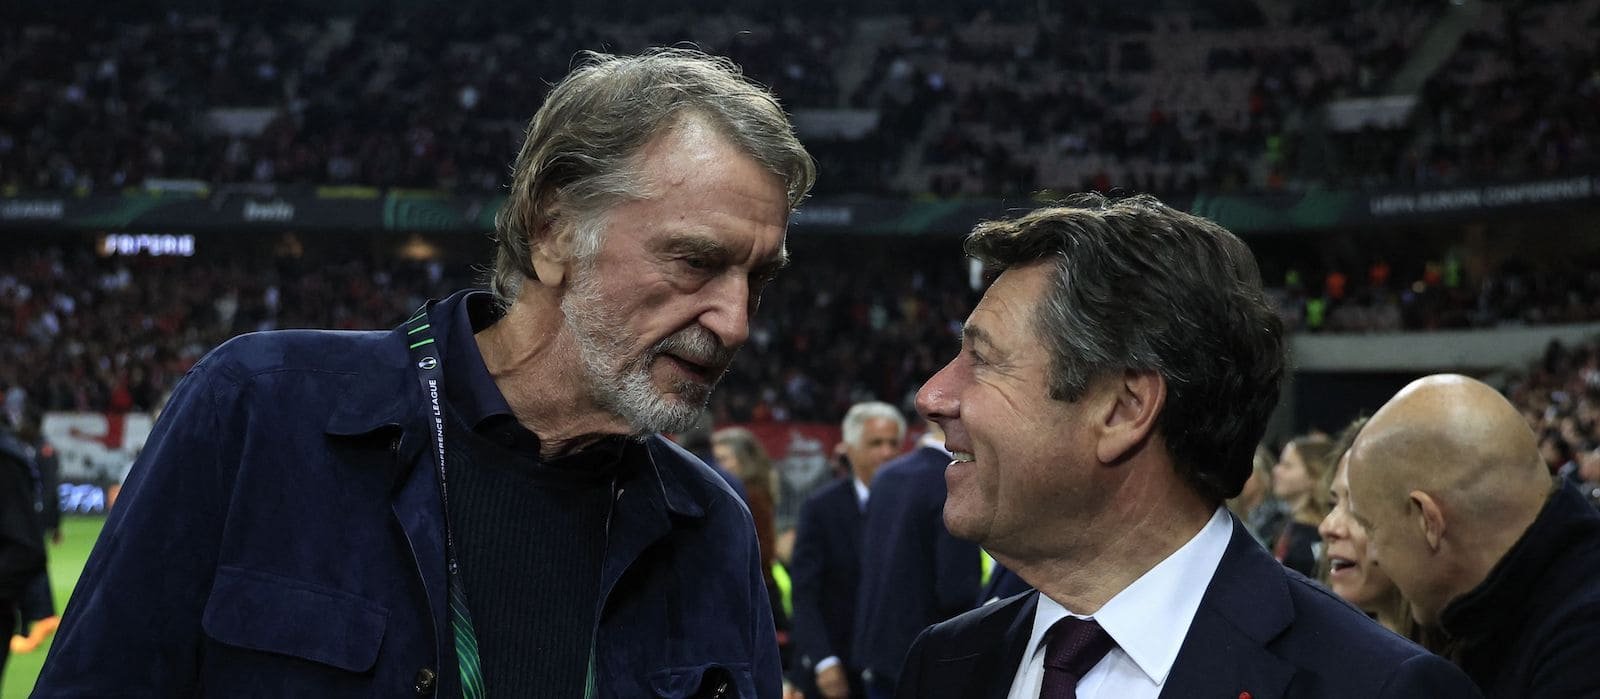 Sir Jim Ratcliffe reassures INEOS creditors over source of funds for Man United investment – Man United News And Transfer News